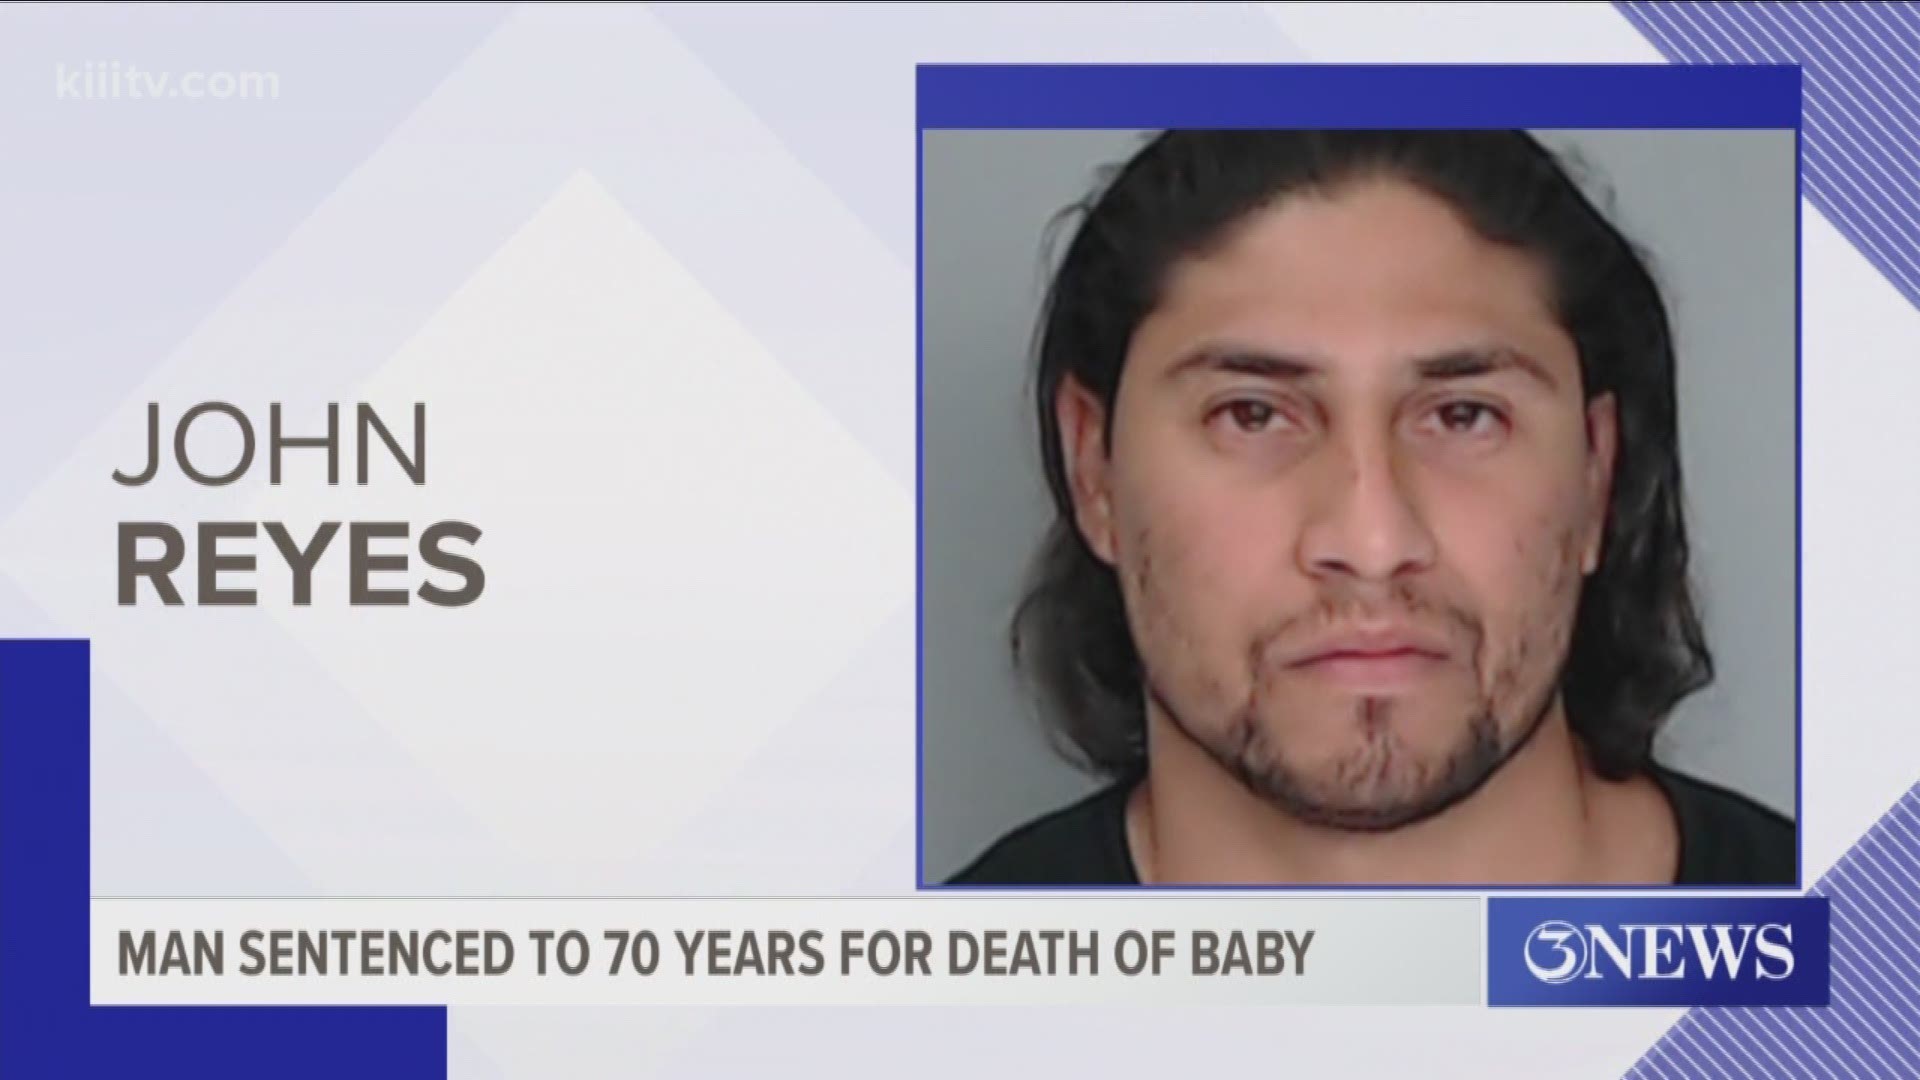 John Reyes told police the infant had fallen off of a counter during a diaper change. Doctors told investigators the injuries were not consistent with a fall.